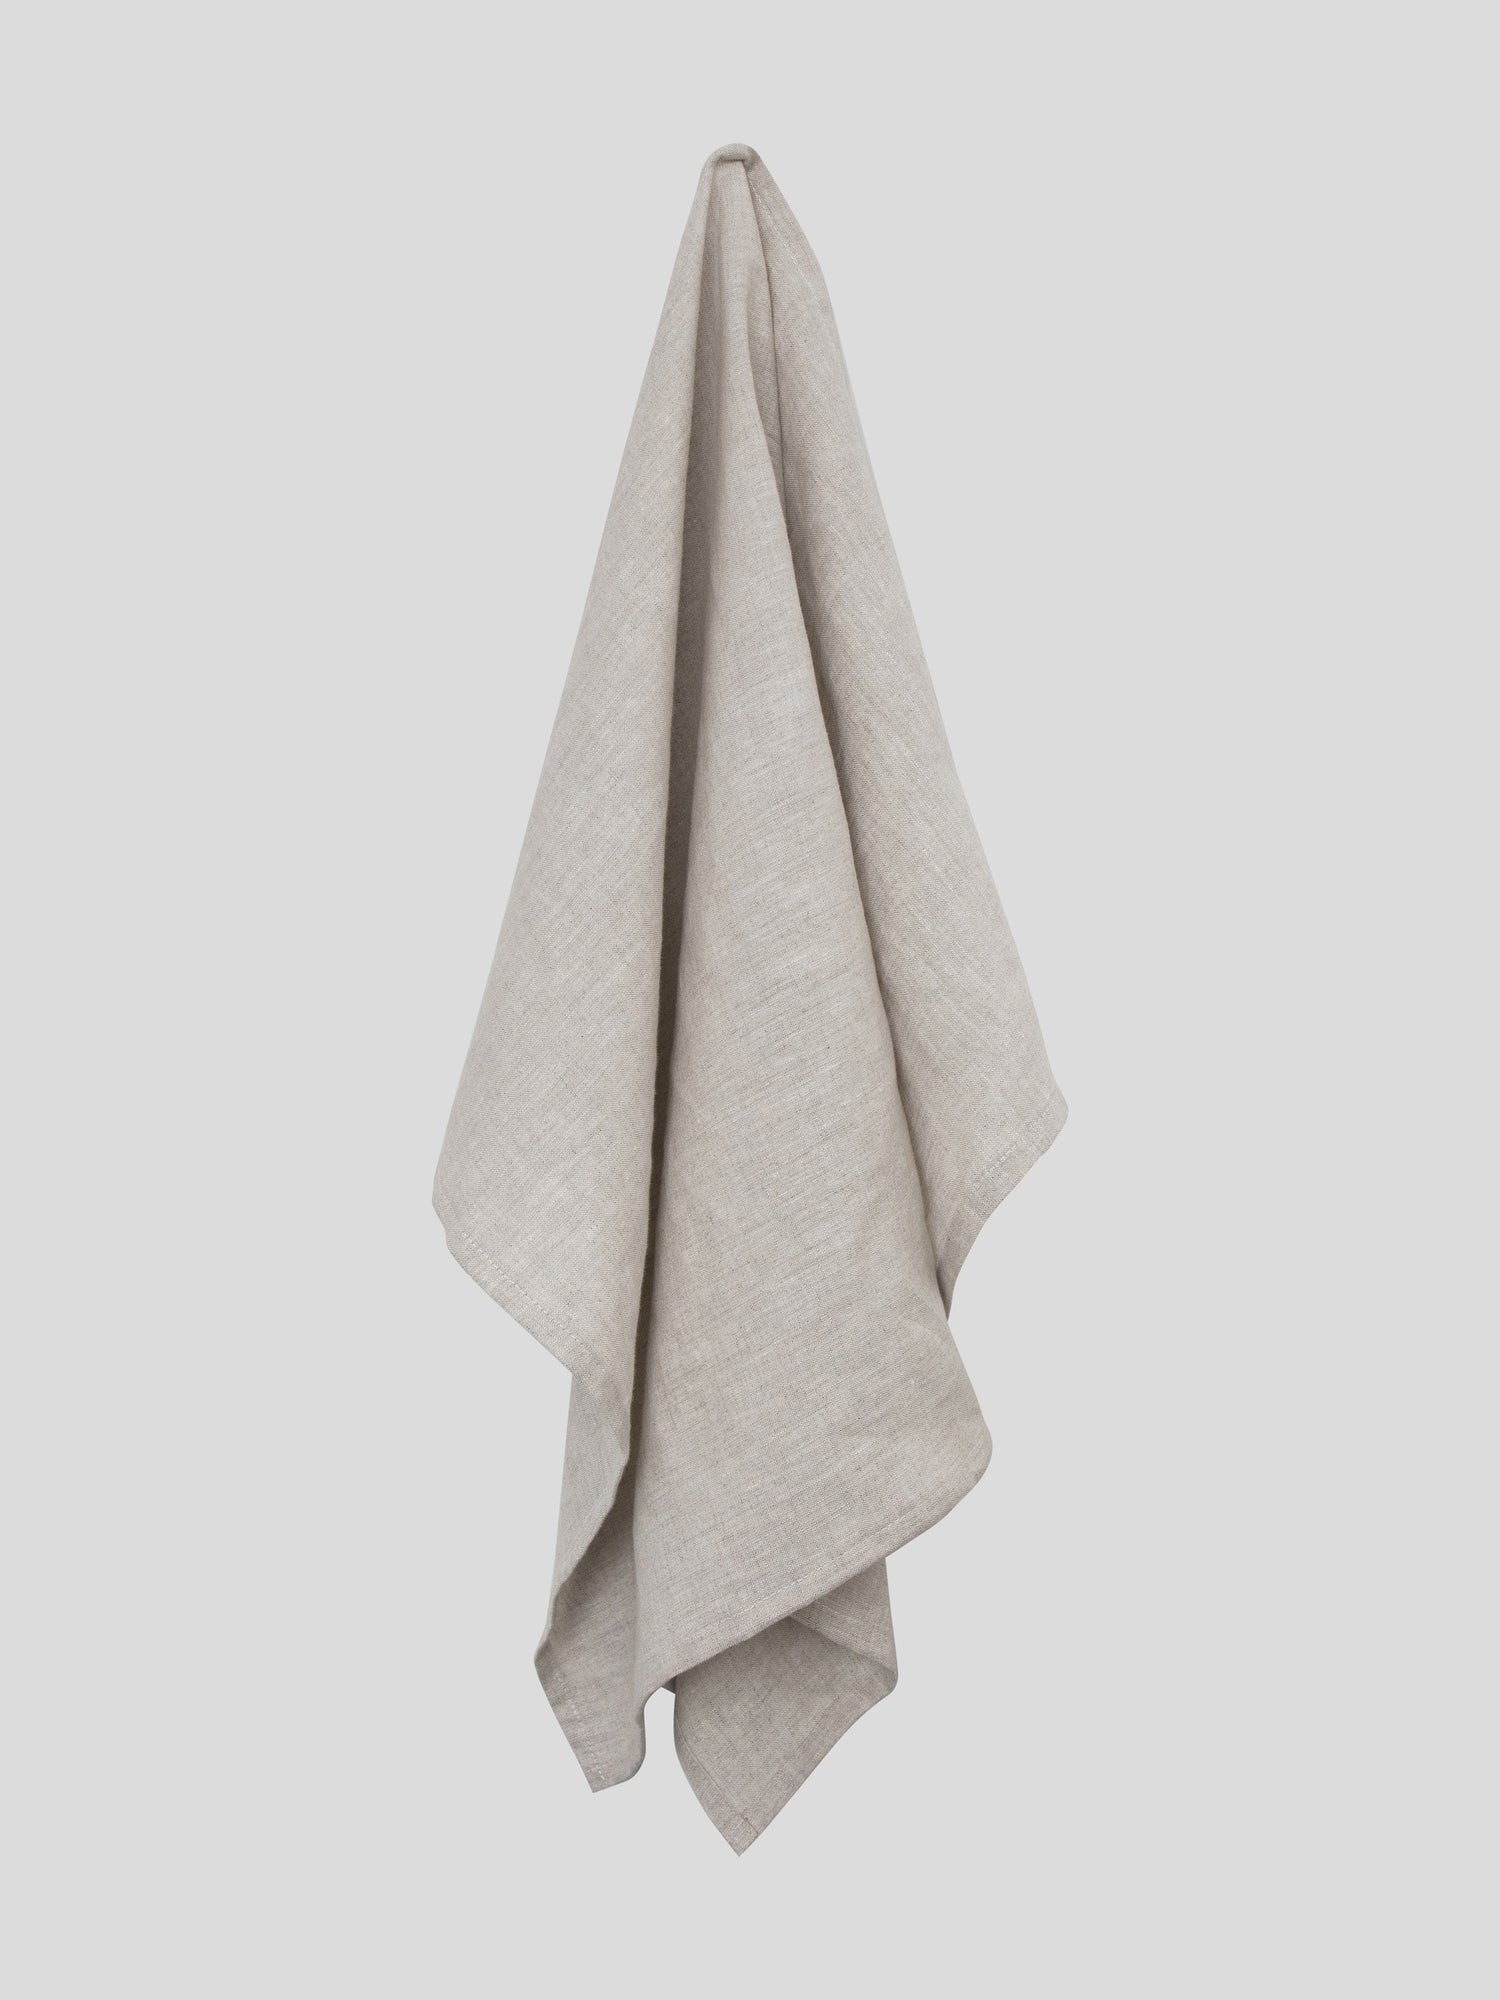 400g Plain Woven 25 * 50cm Soft Tea Towels With 80% Polyester And 20%